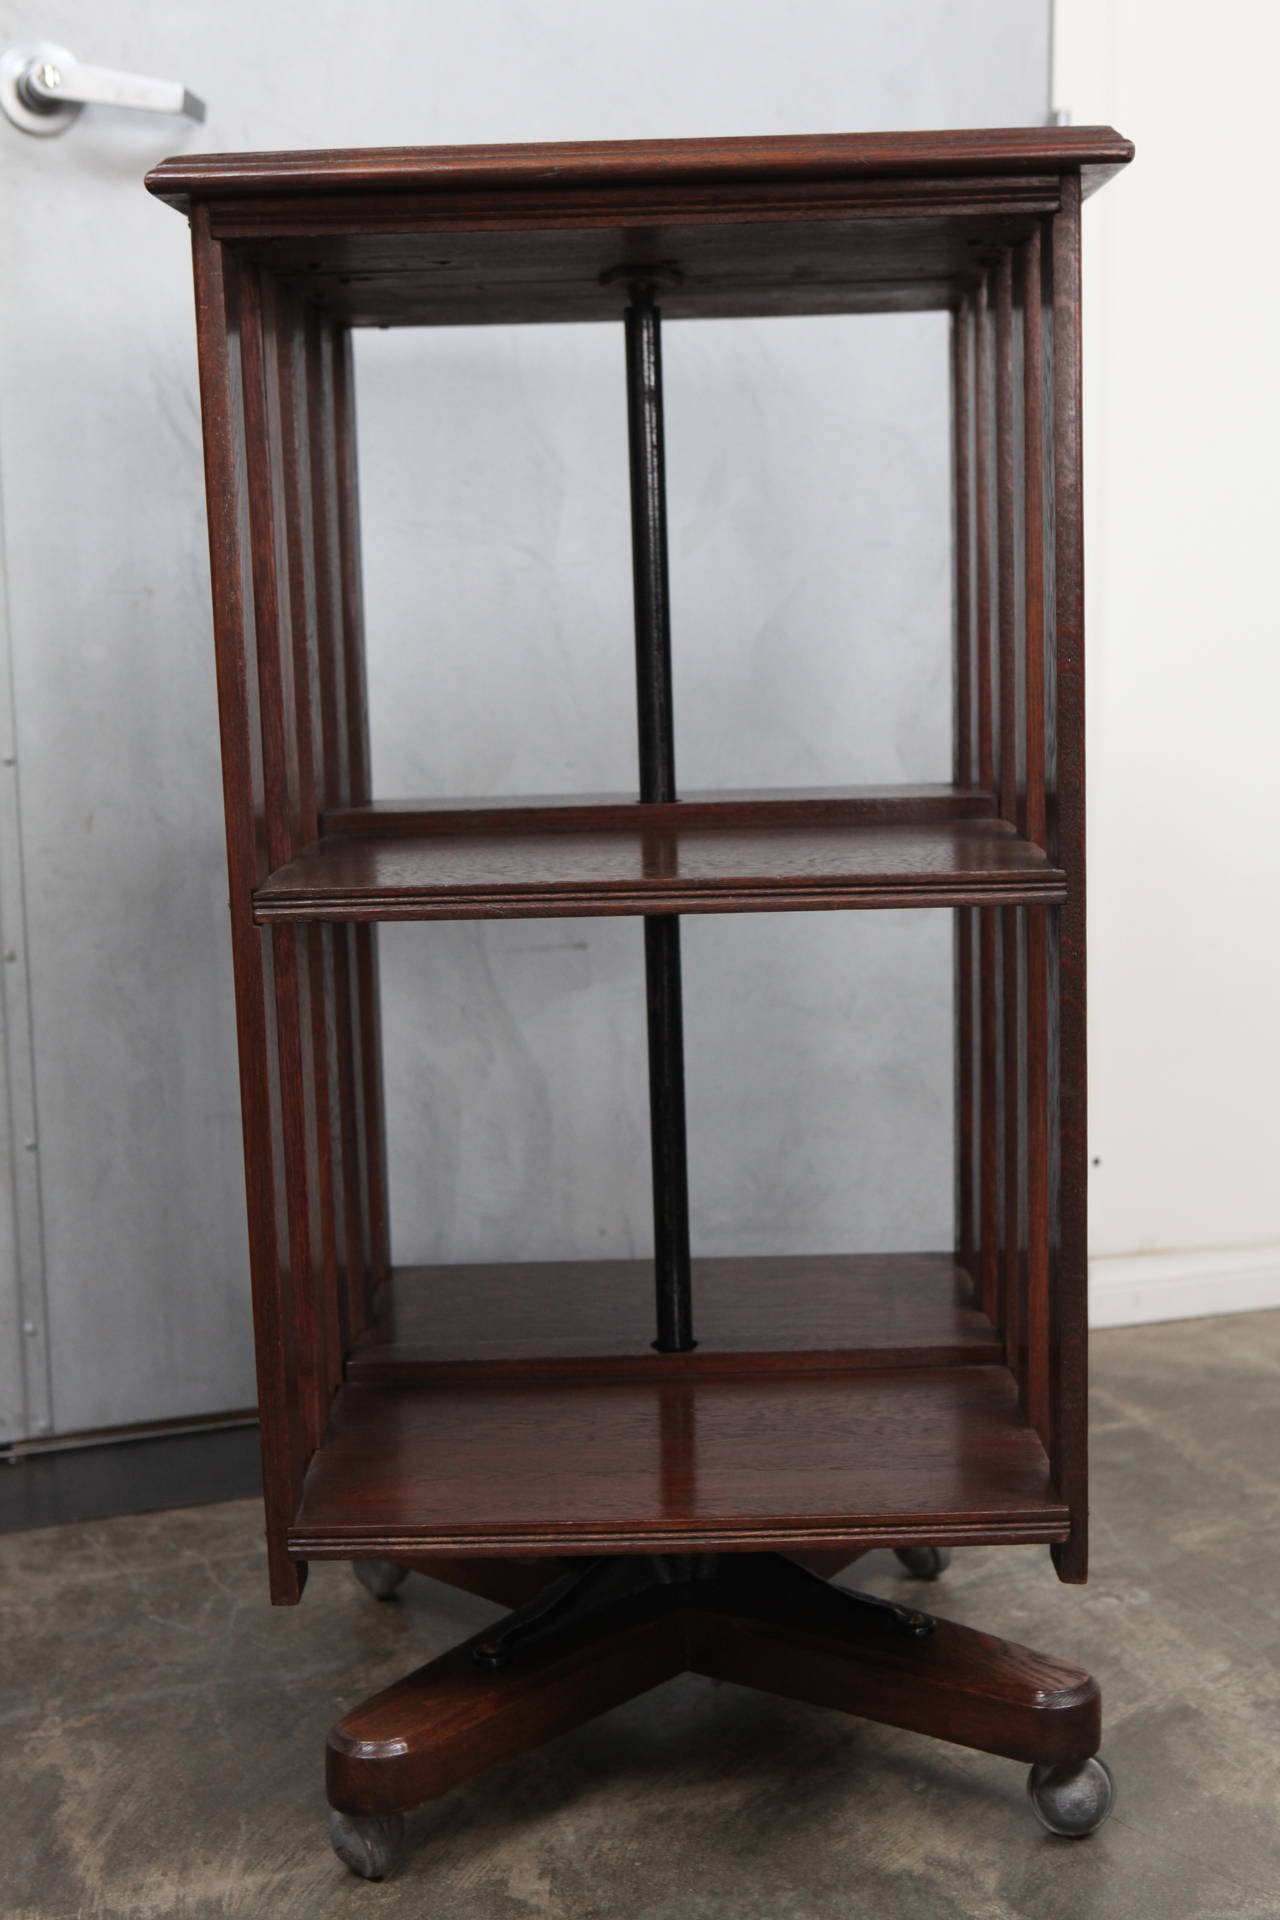 This handsome english revolving bookcase has one shelf, slated sides and a central metal column. The body is mounted on four pronged wooden feet with casters. Note the decorative brass screws and the molded edging.